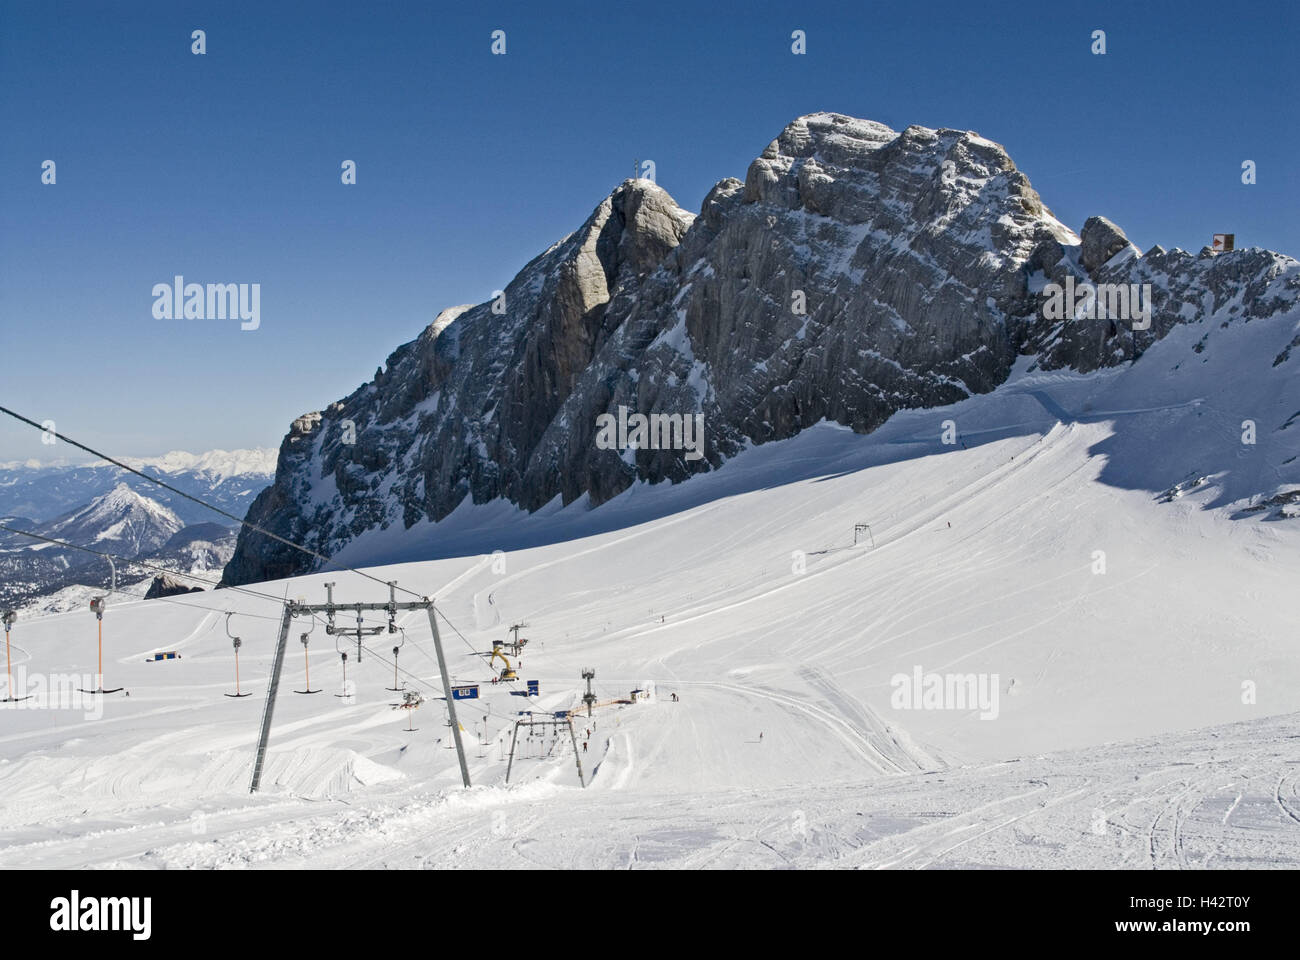 Austria, Styria, Ramsau in the roof stone, mountain landscape, ski lift, winter scenery, UNESCO-world nature heir, UNESCO-world cultural heritage, nature, mountains, summit, mountain, snow, runway, heaven, cloudless, blue, Stock Photo